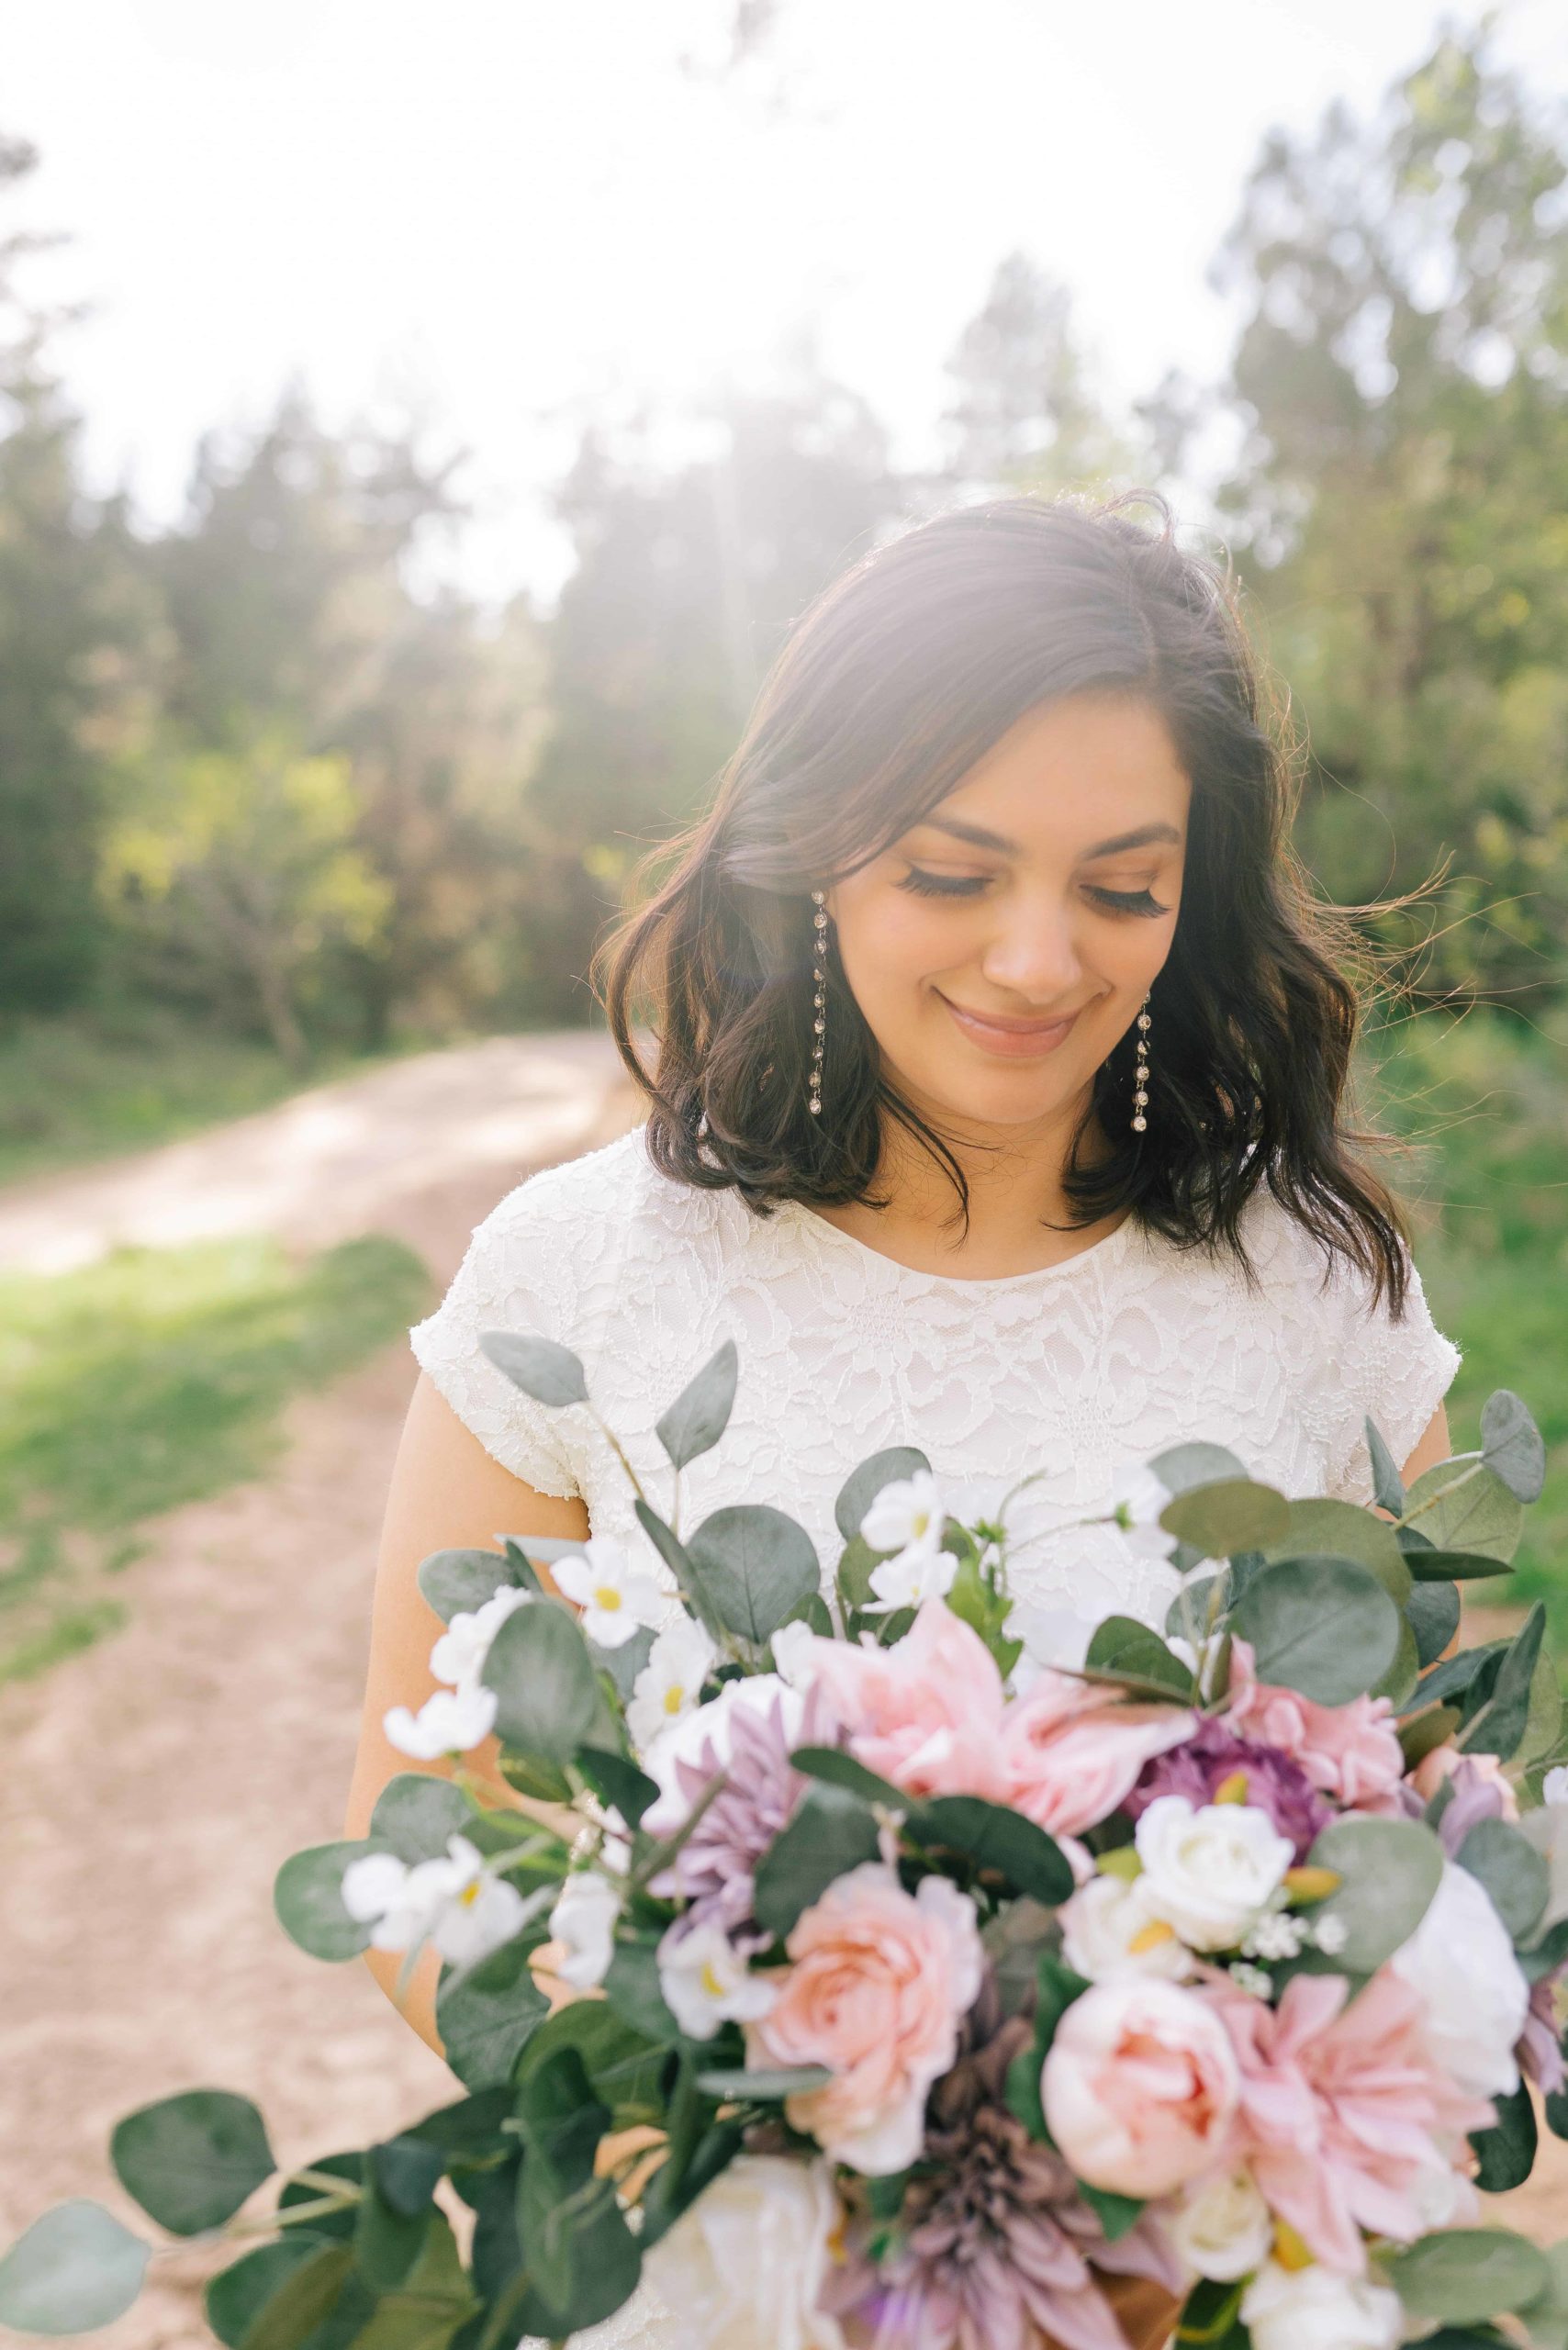 stunning Latina bride holding her wedding bouquet of soft pinks and purples smiling as she looks down with her eyes and she sun shine from behind her